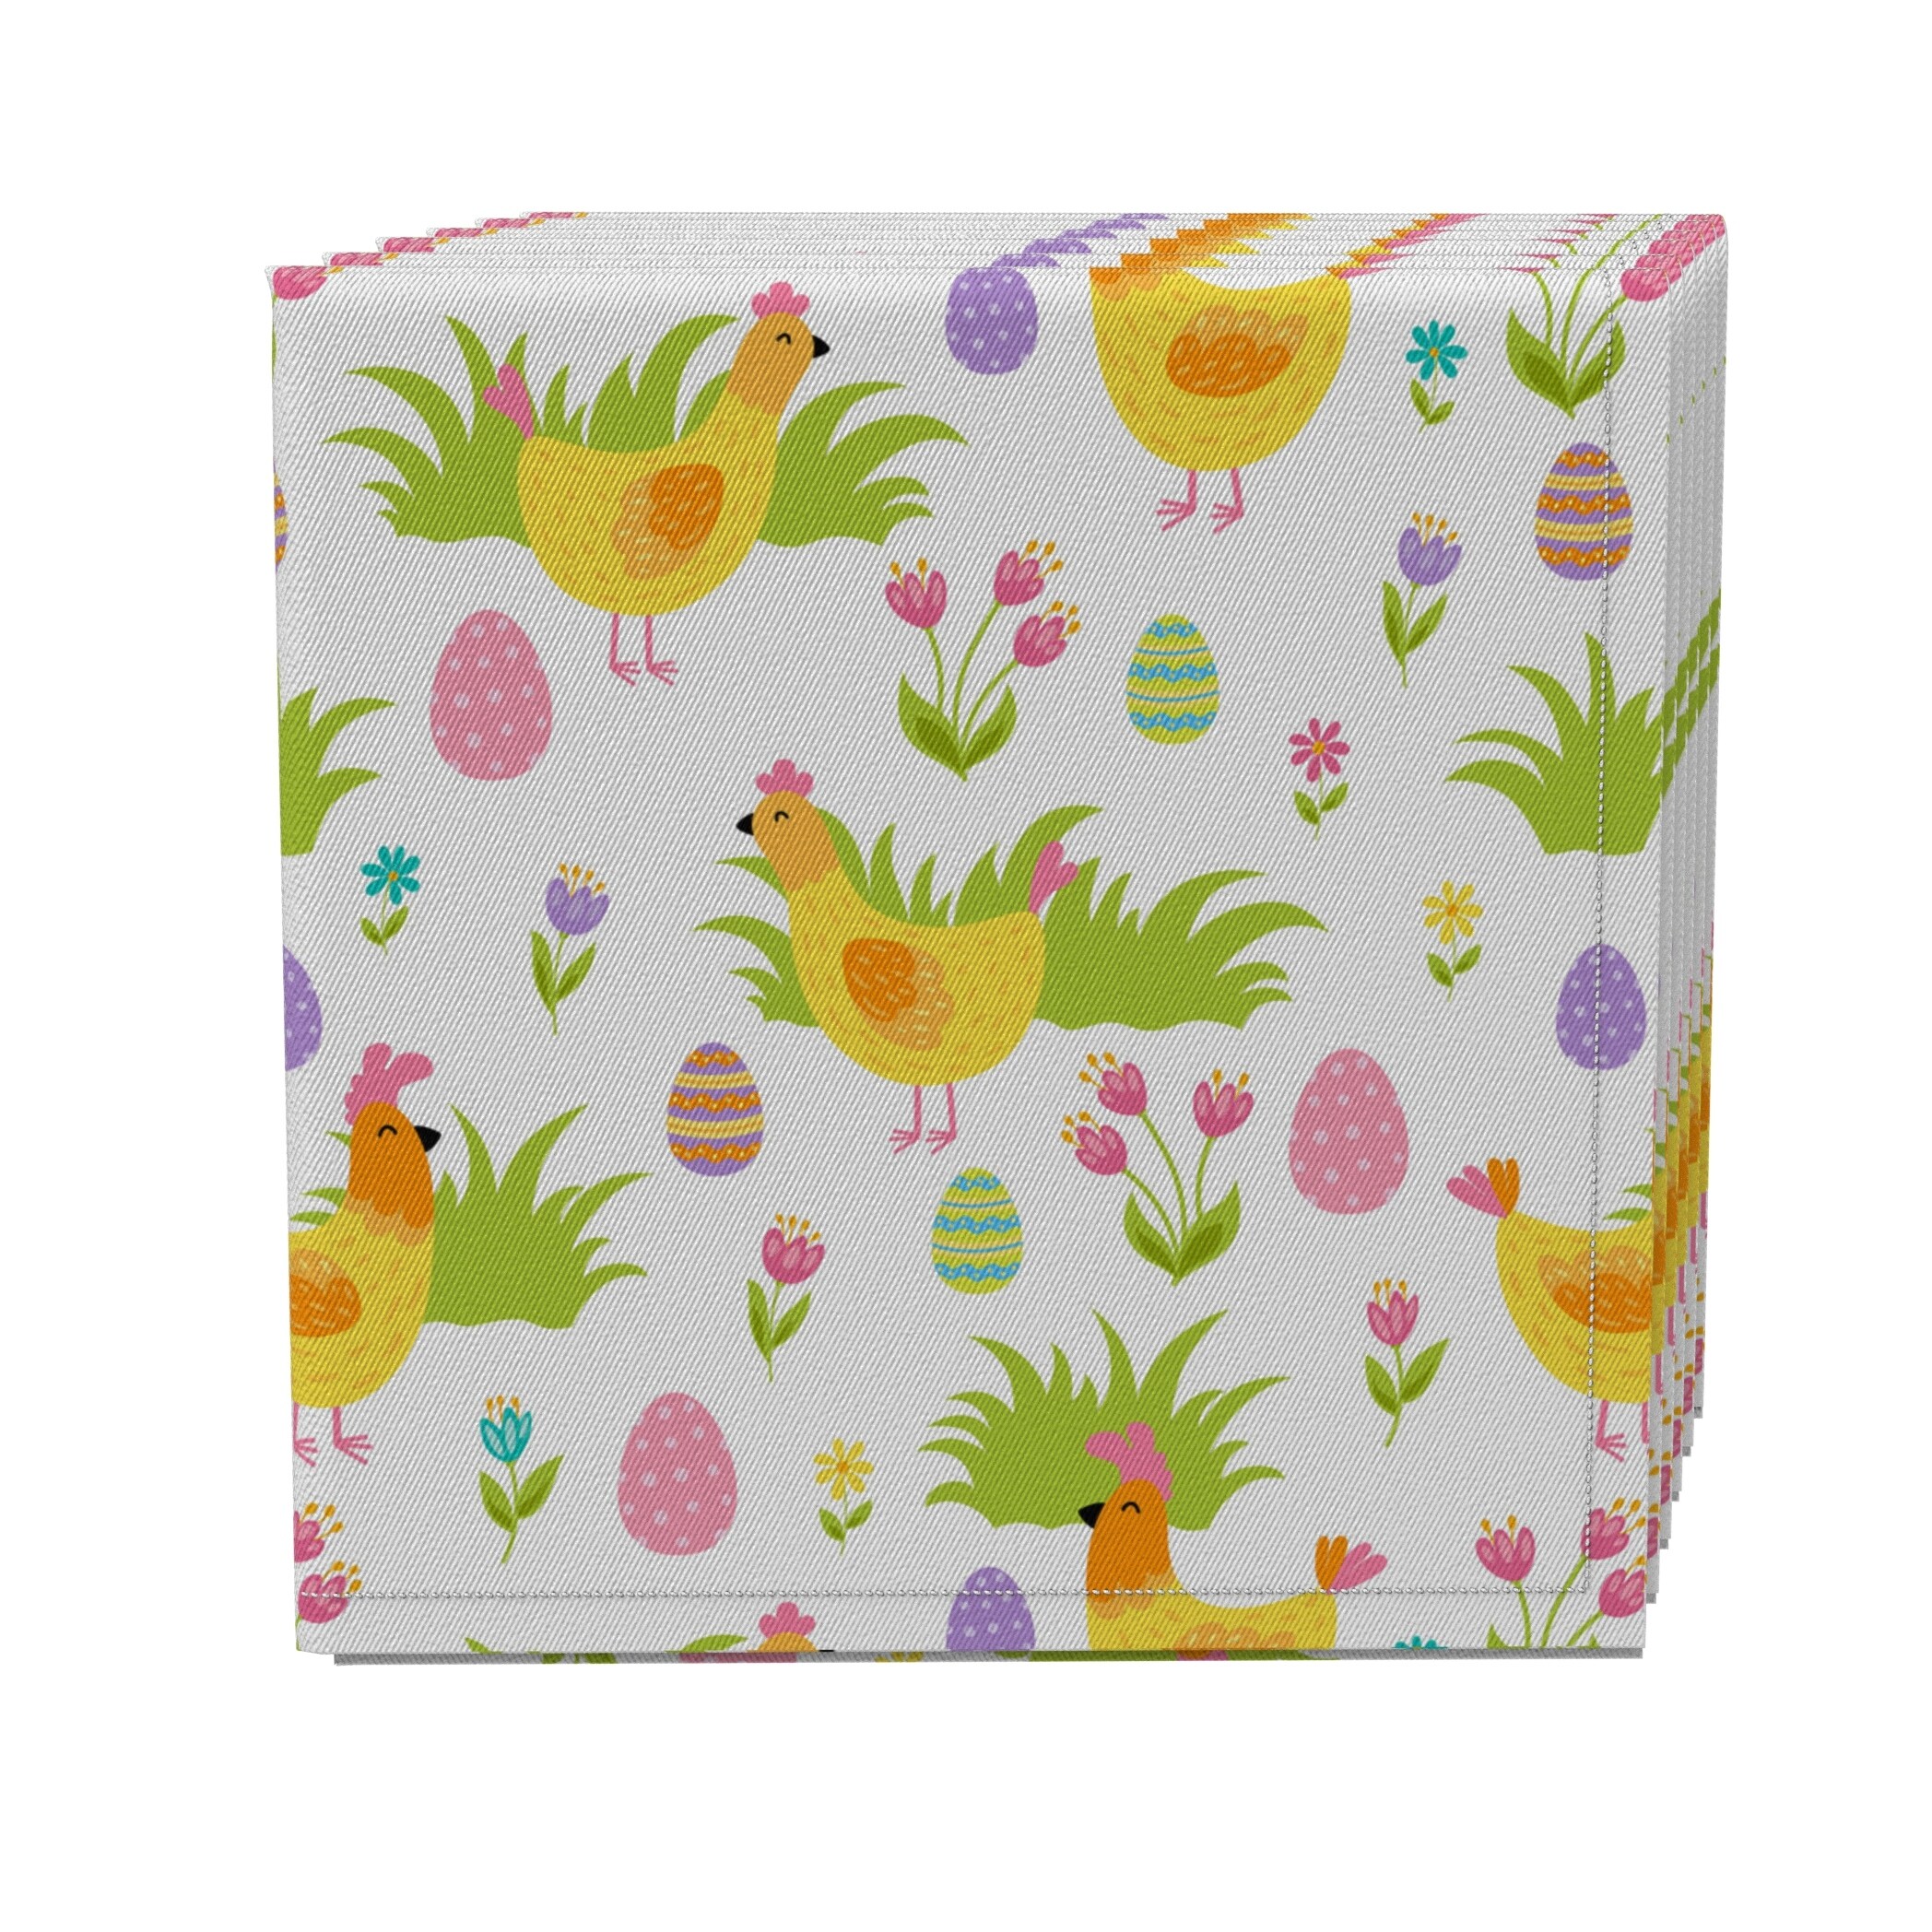 Fabric Textile Products, Inc. Napkin Set of 4, 100% Cotton, 20x20", Cute Springtime Easter - 20 x 20